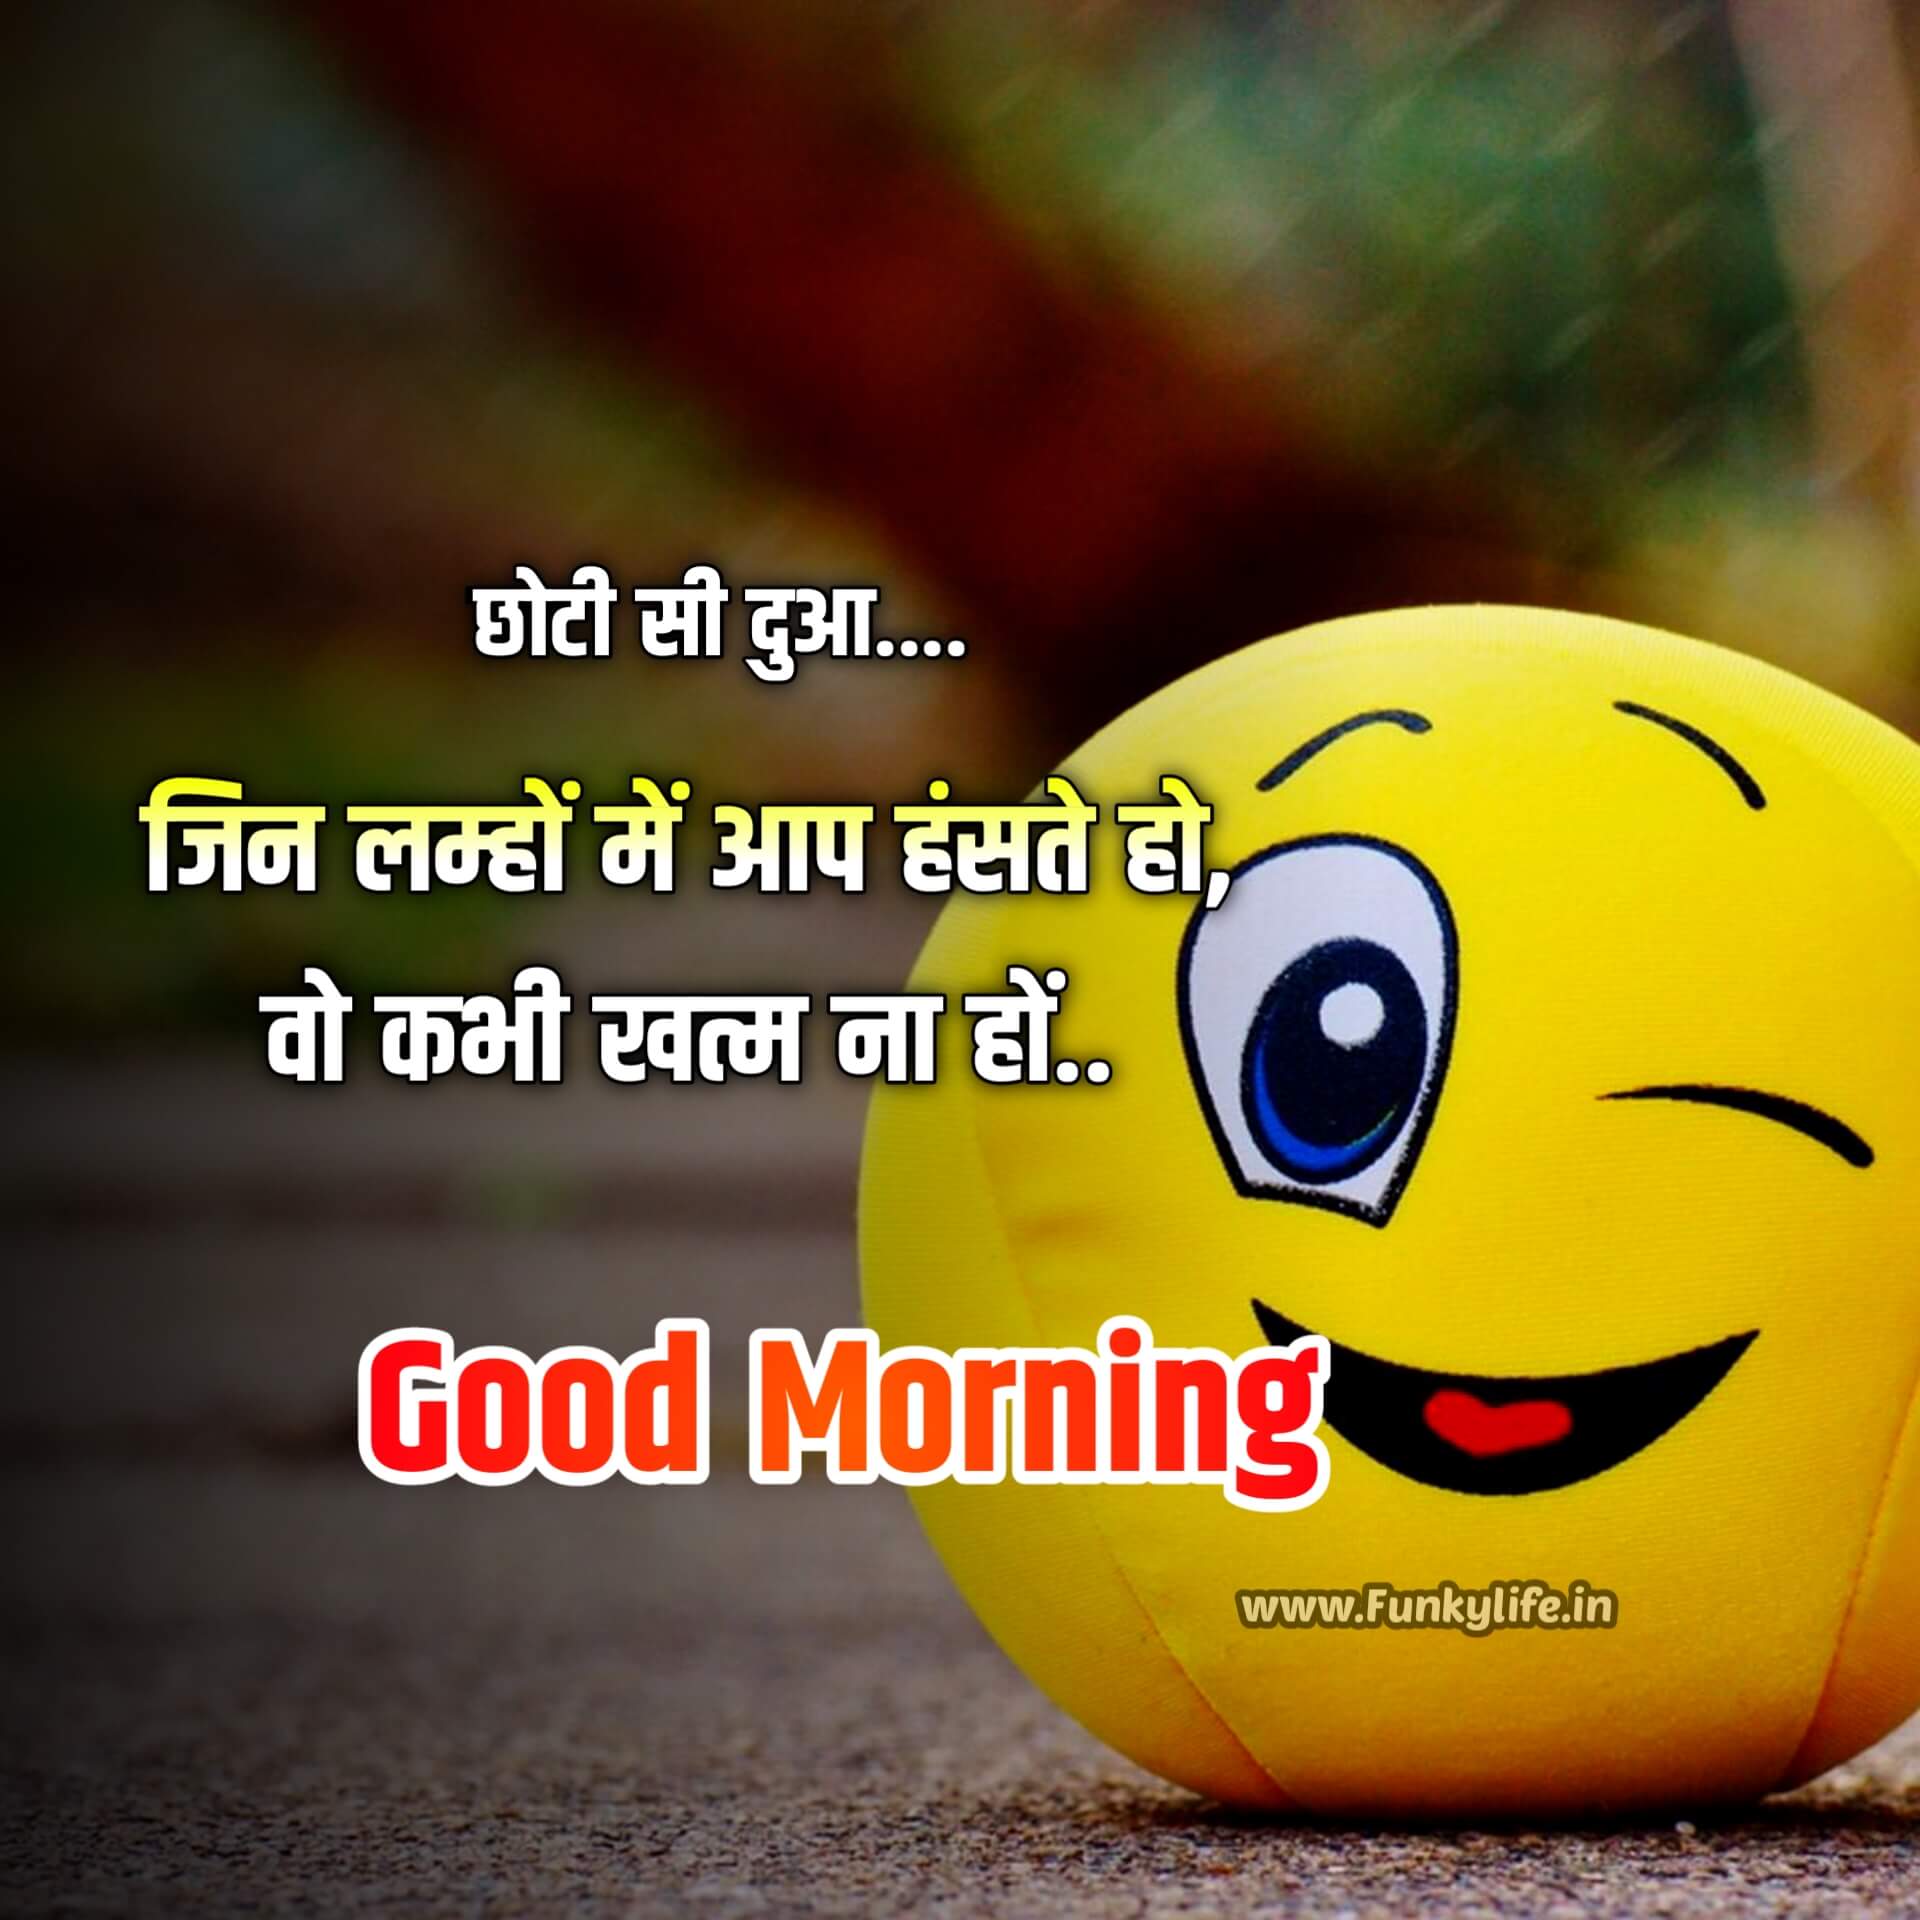 Good Morning Messages For Friends in Hindi